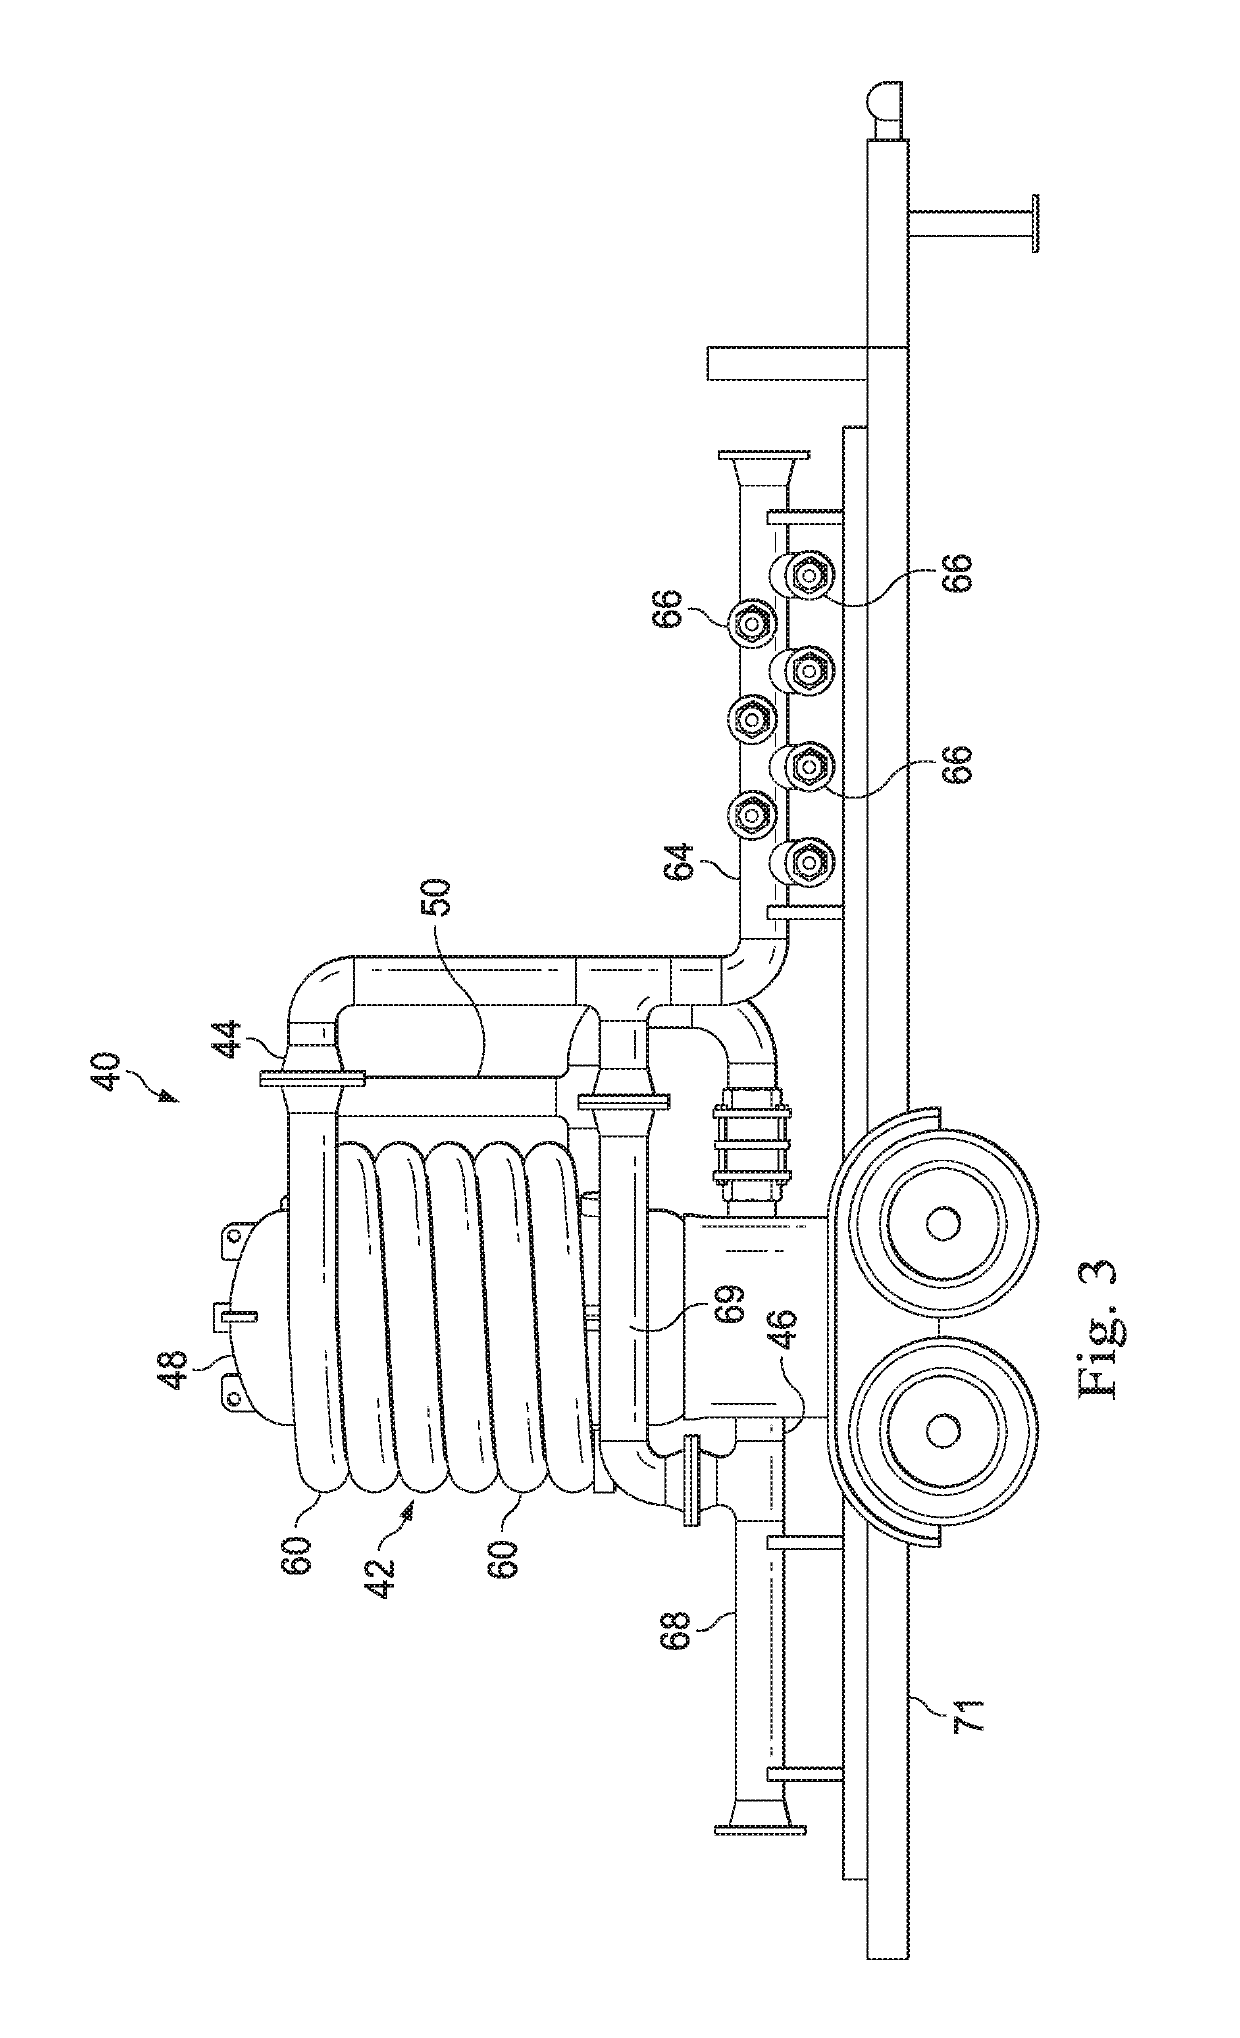 Apparatus and method for treatment of hydraulic fracturing fluid during hydraulic fracturing